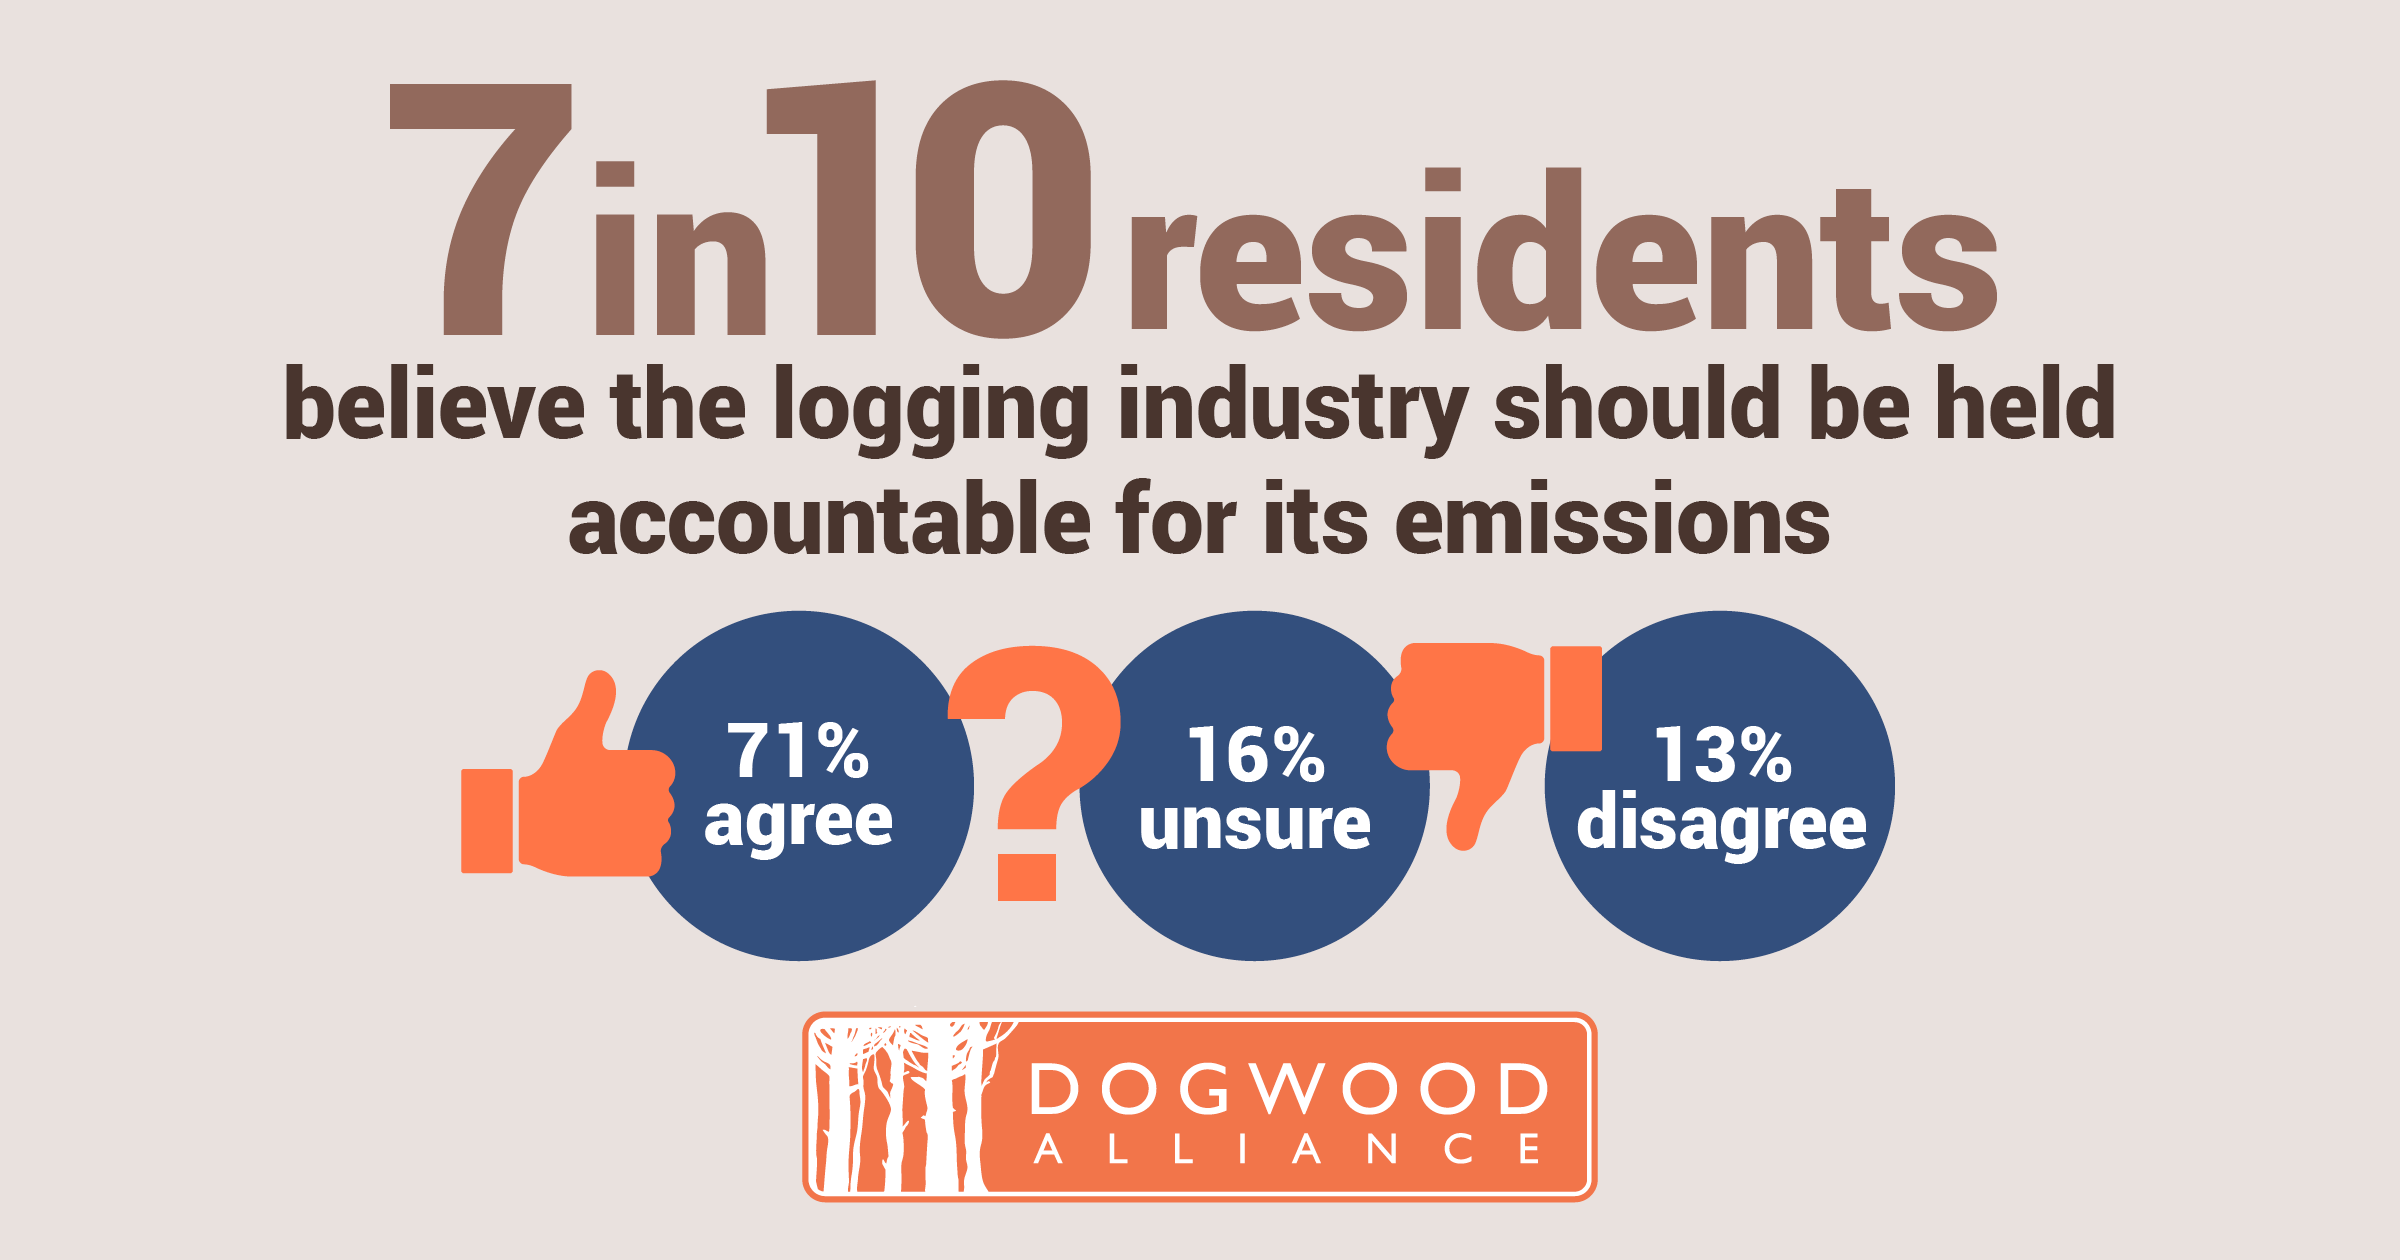 7 in 10 NC residents believe that the logging industry should be held accountable for its carbon emissions